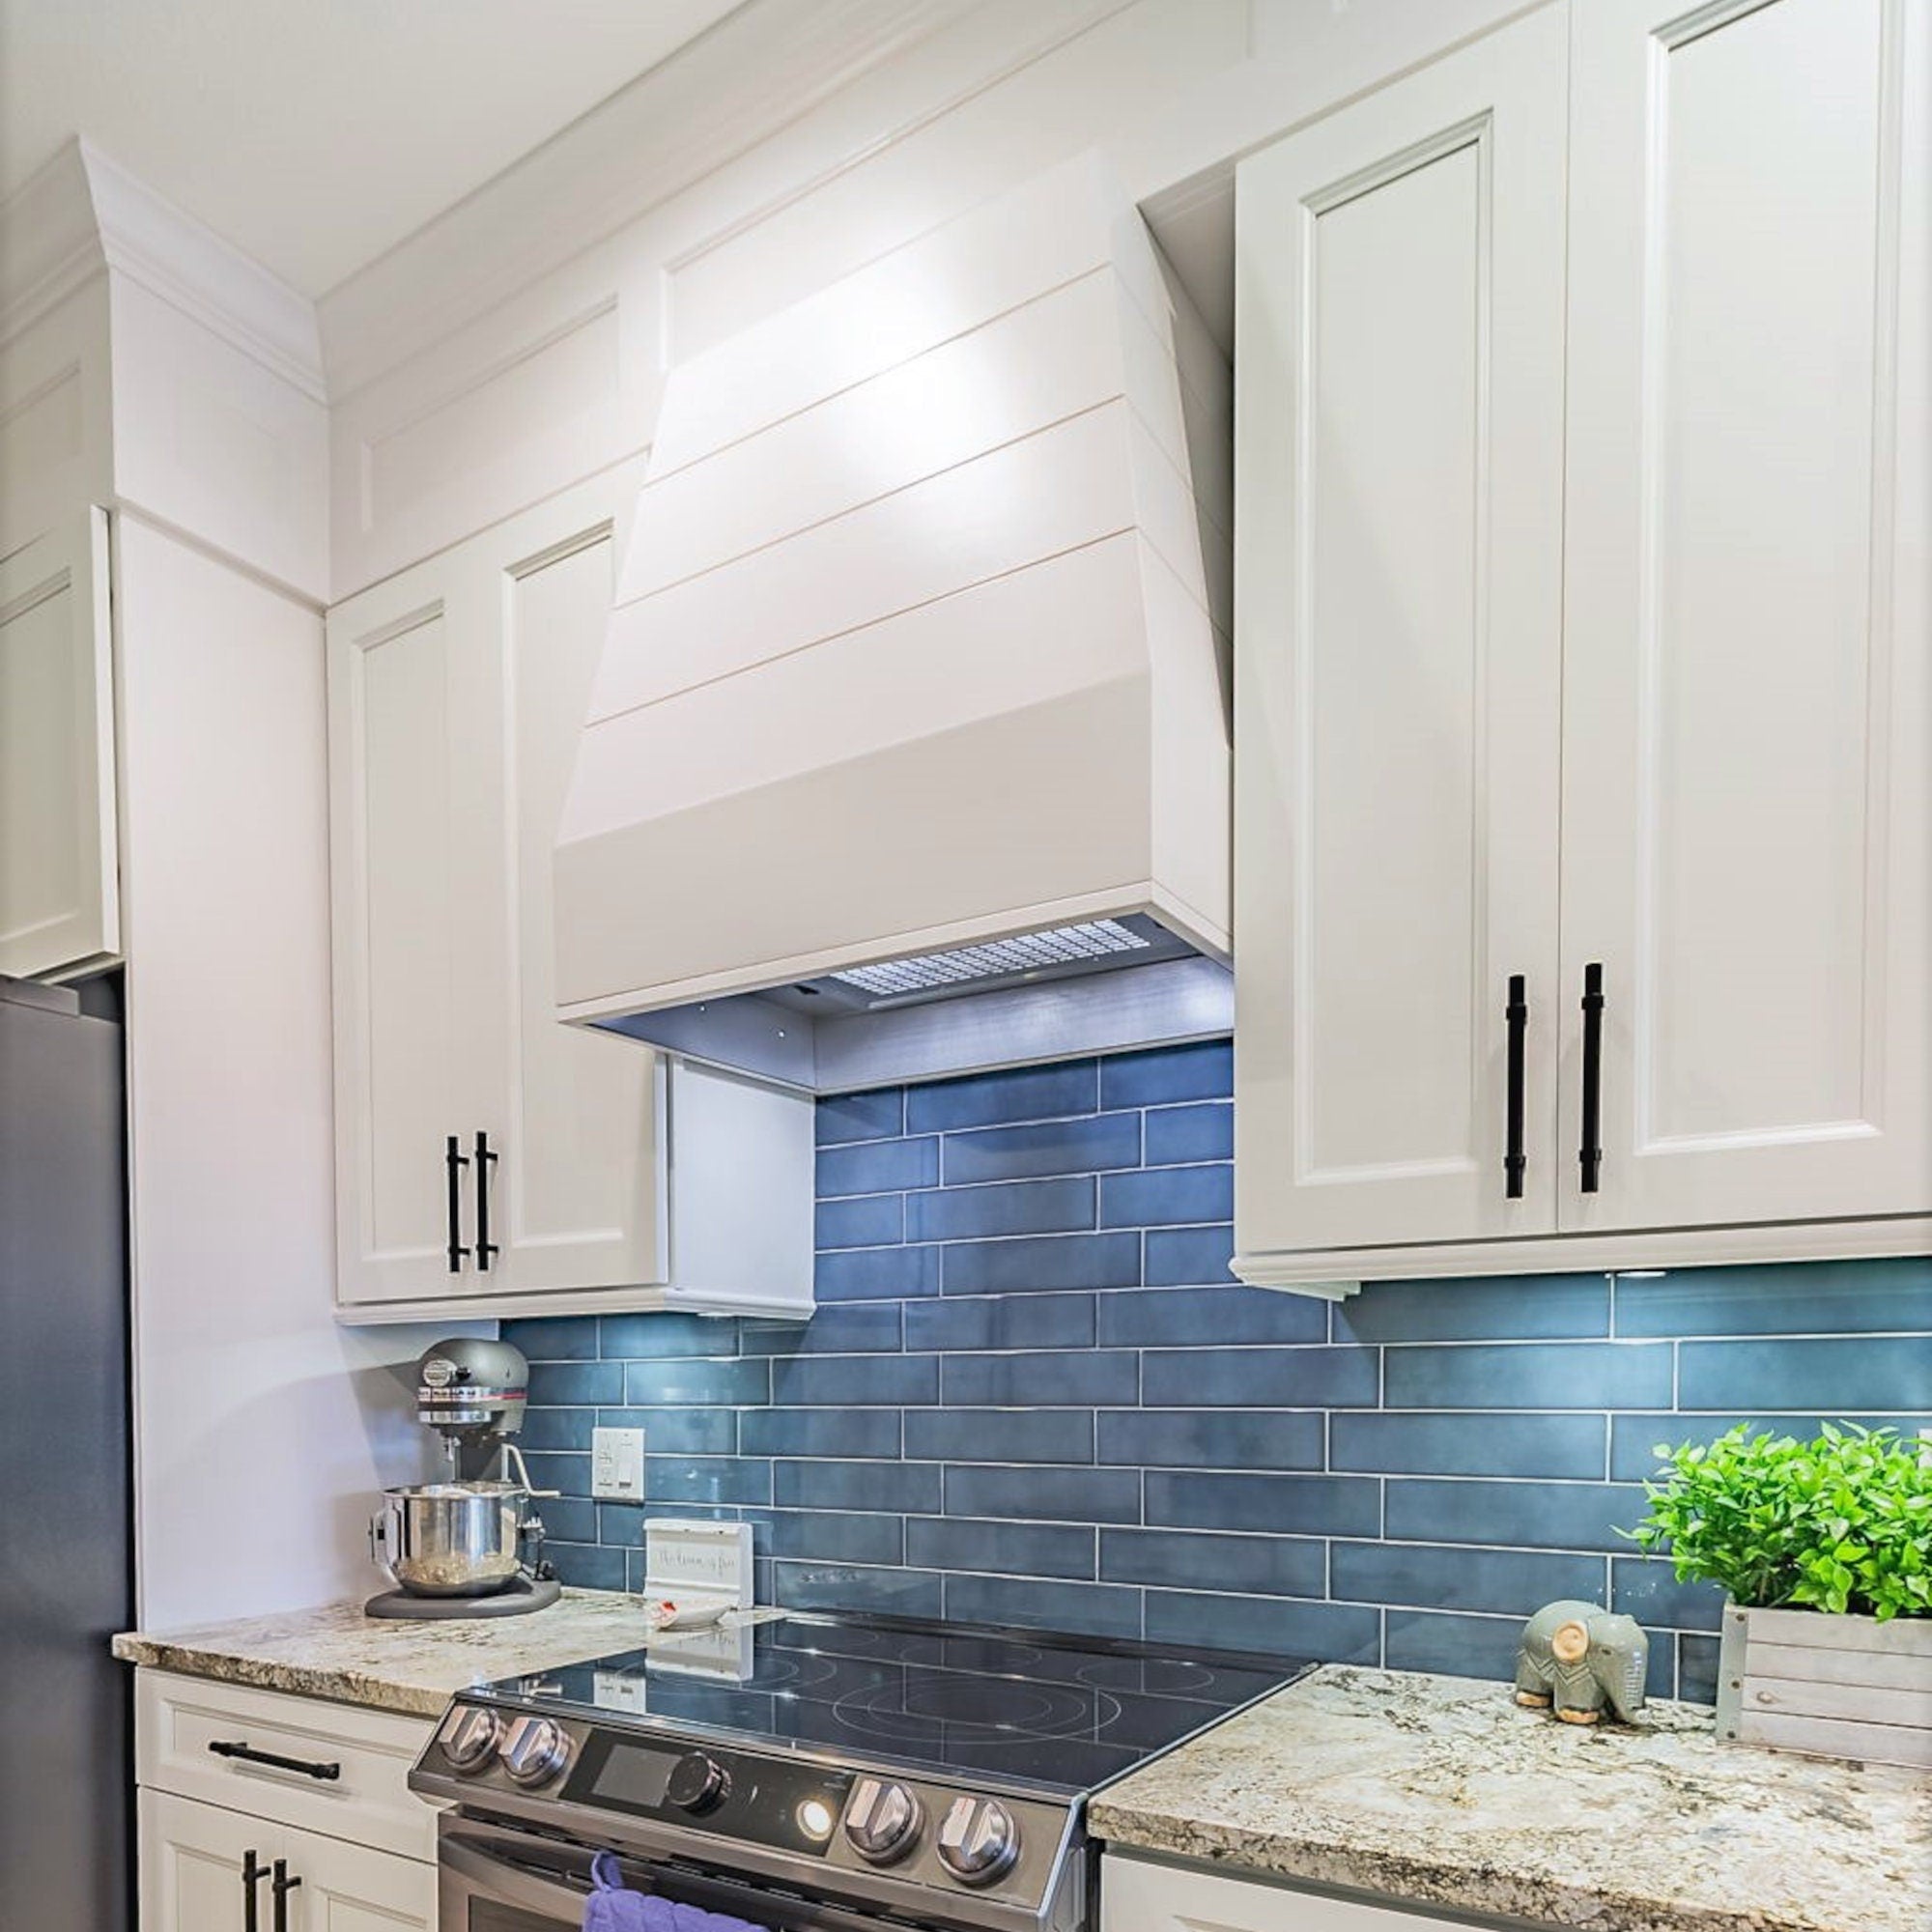 White Wood Range Hood With Tapered Strapped Front and Block Trim - 30", 36", 42", 48", 54" and 60" Widths Available